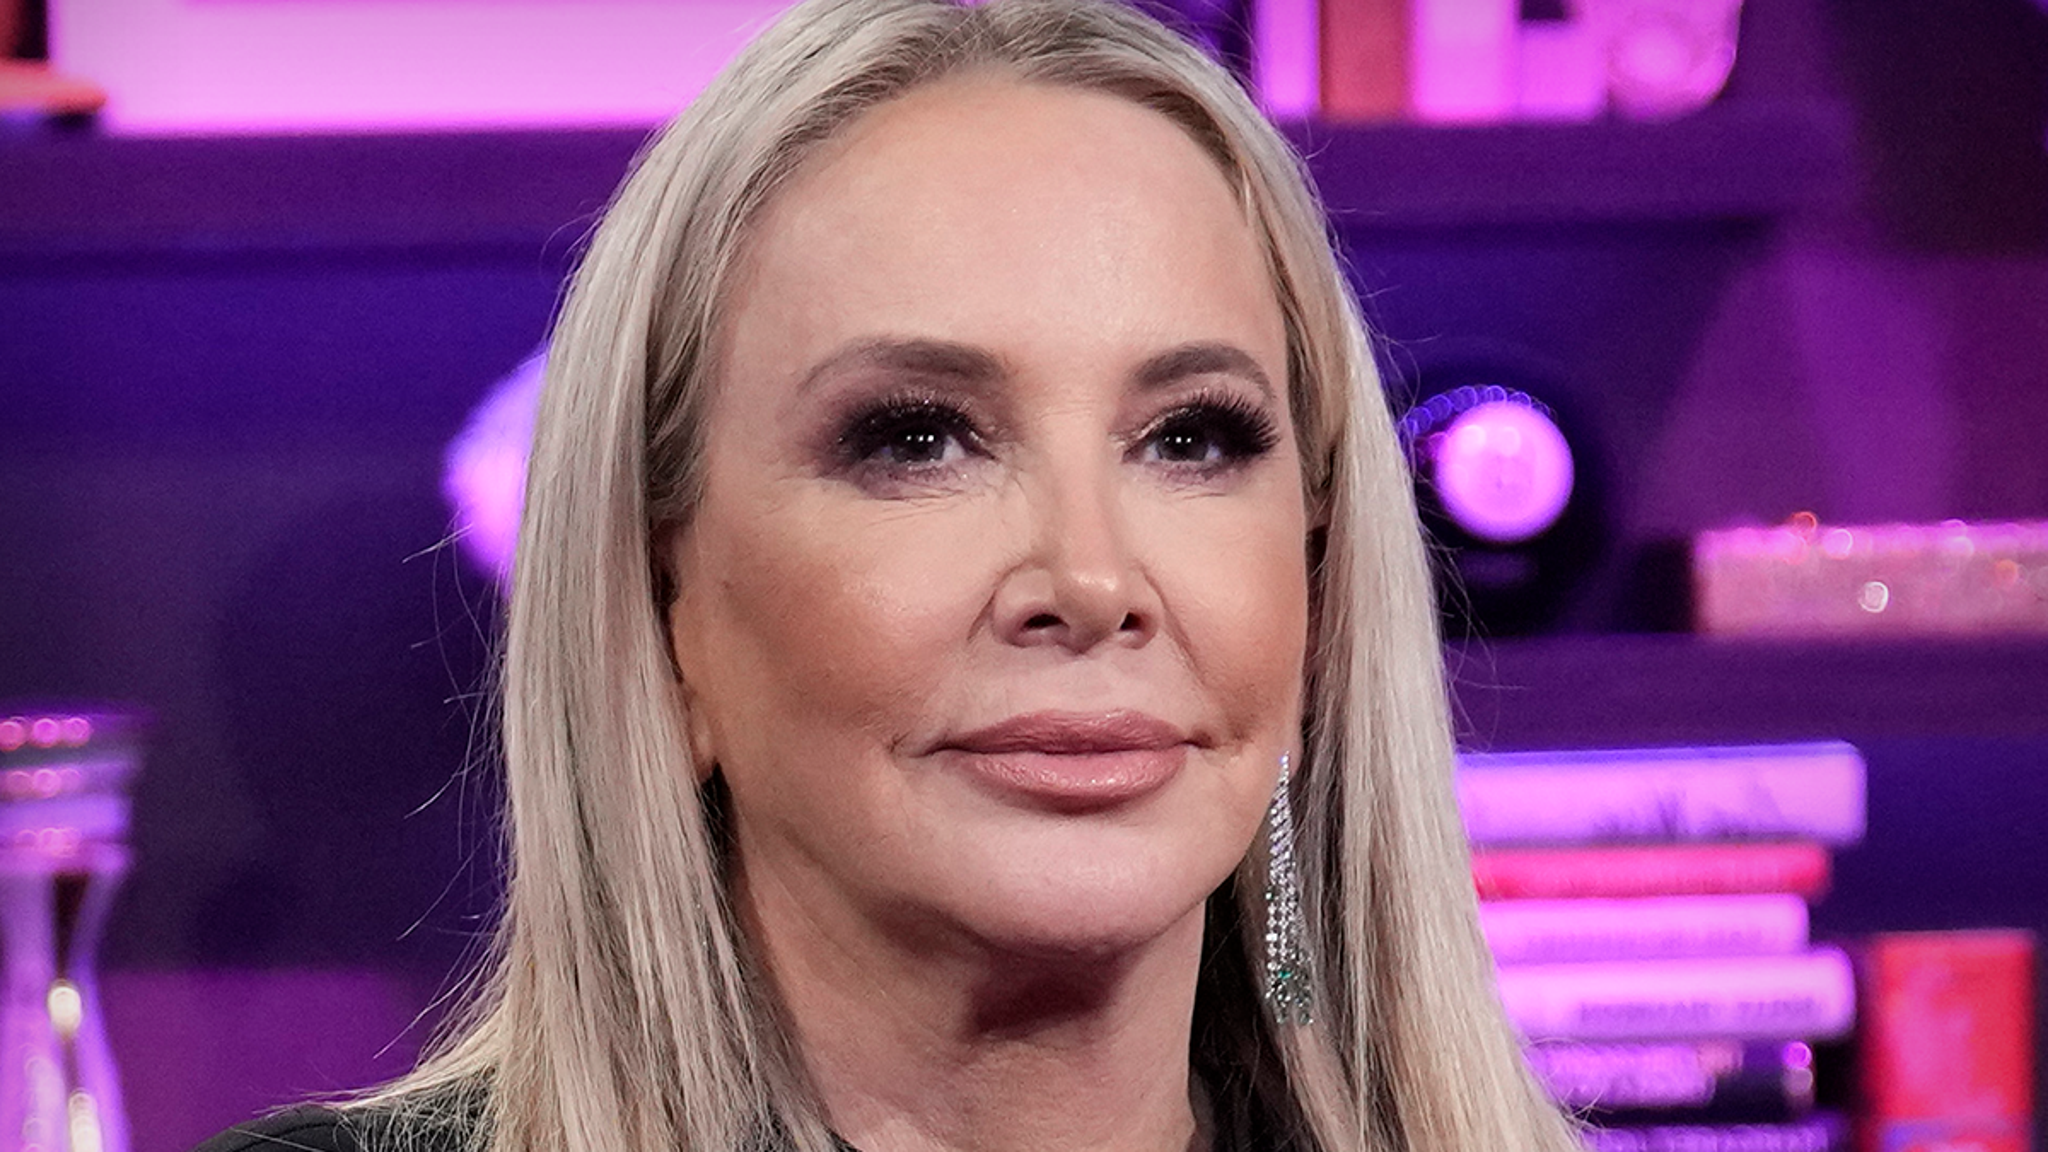 Shannon Beador Breaks Silence On DUI Case After Sentencing, 'Learned So Much'